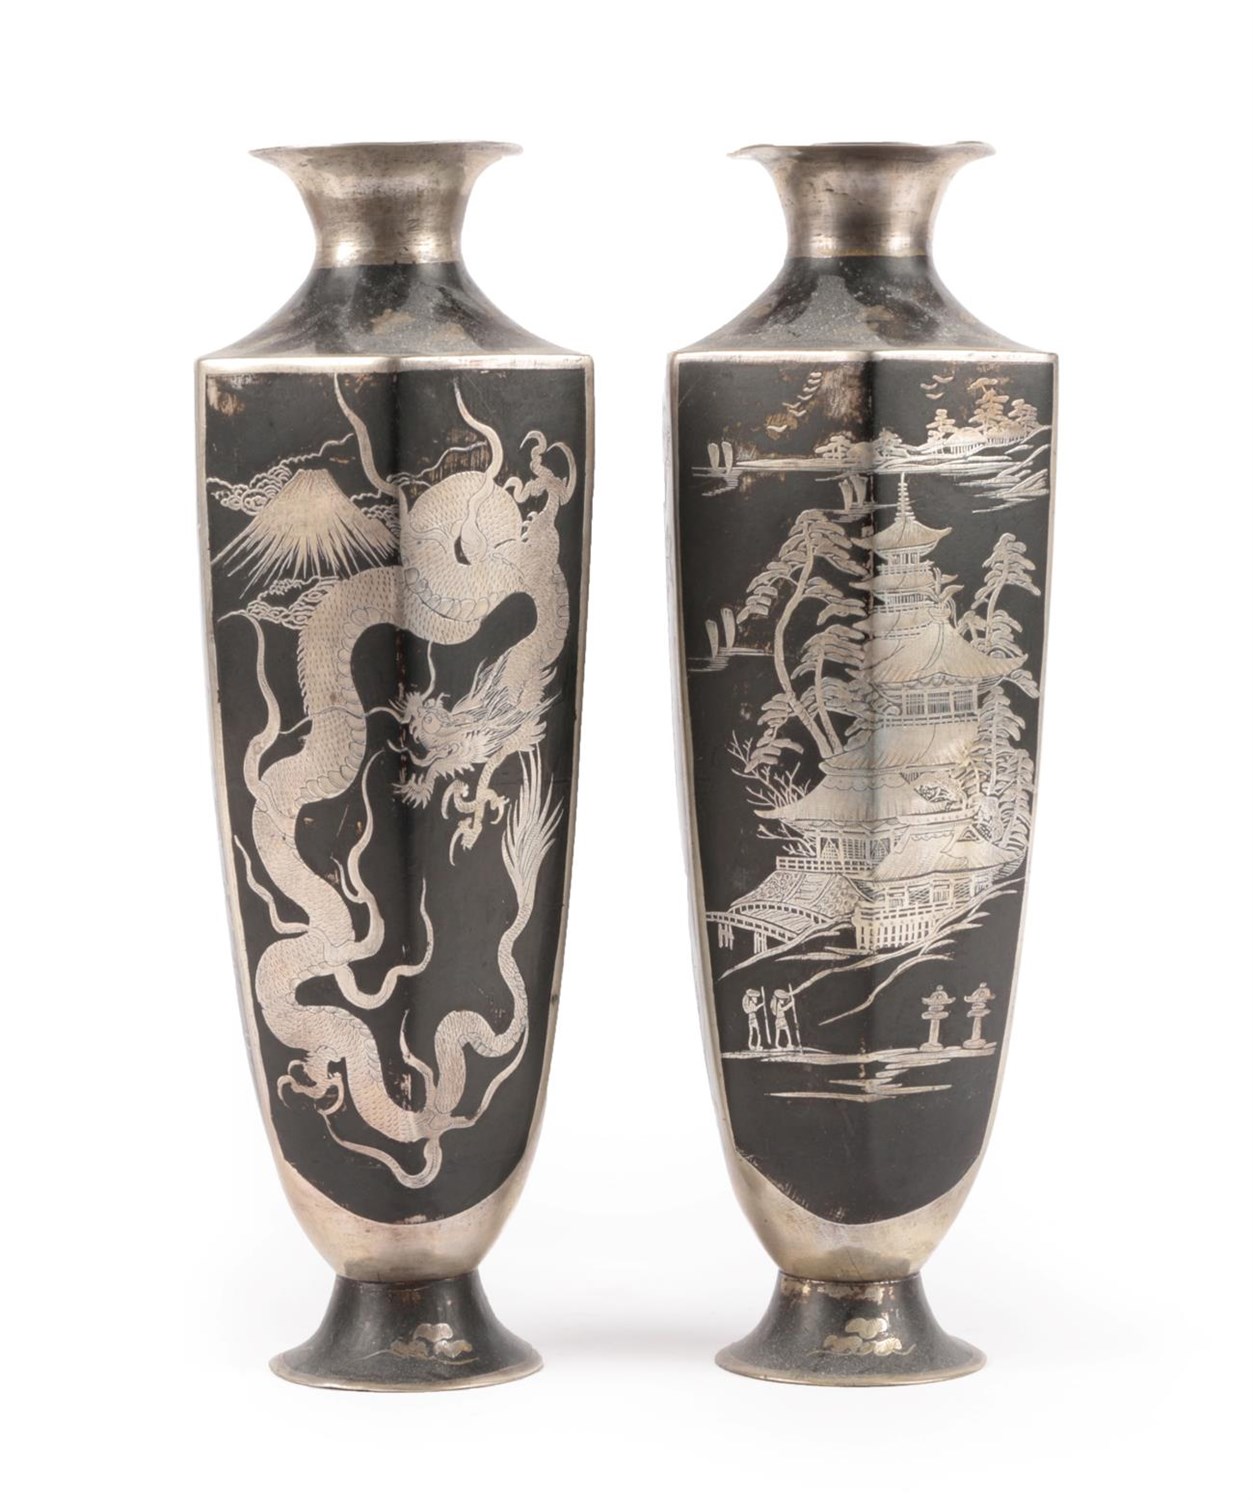 Lot 50 - A Pair of Japanese Patinated White Metal Vases, Meiji period, of octagonal baluster form, decorated